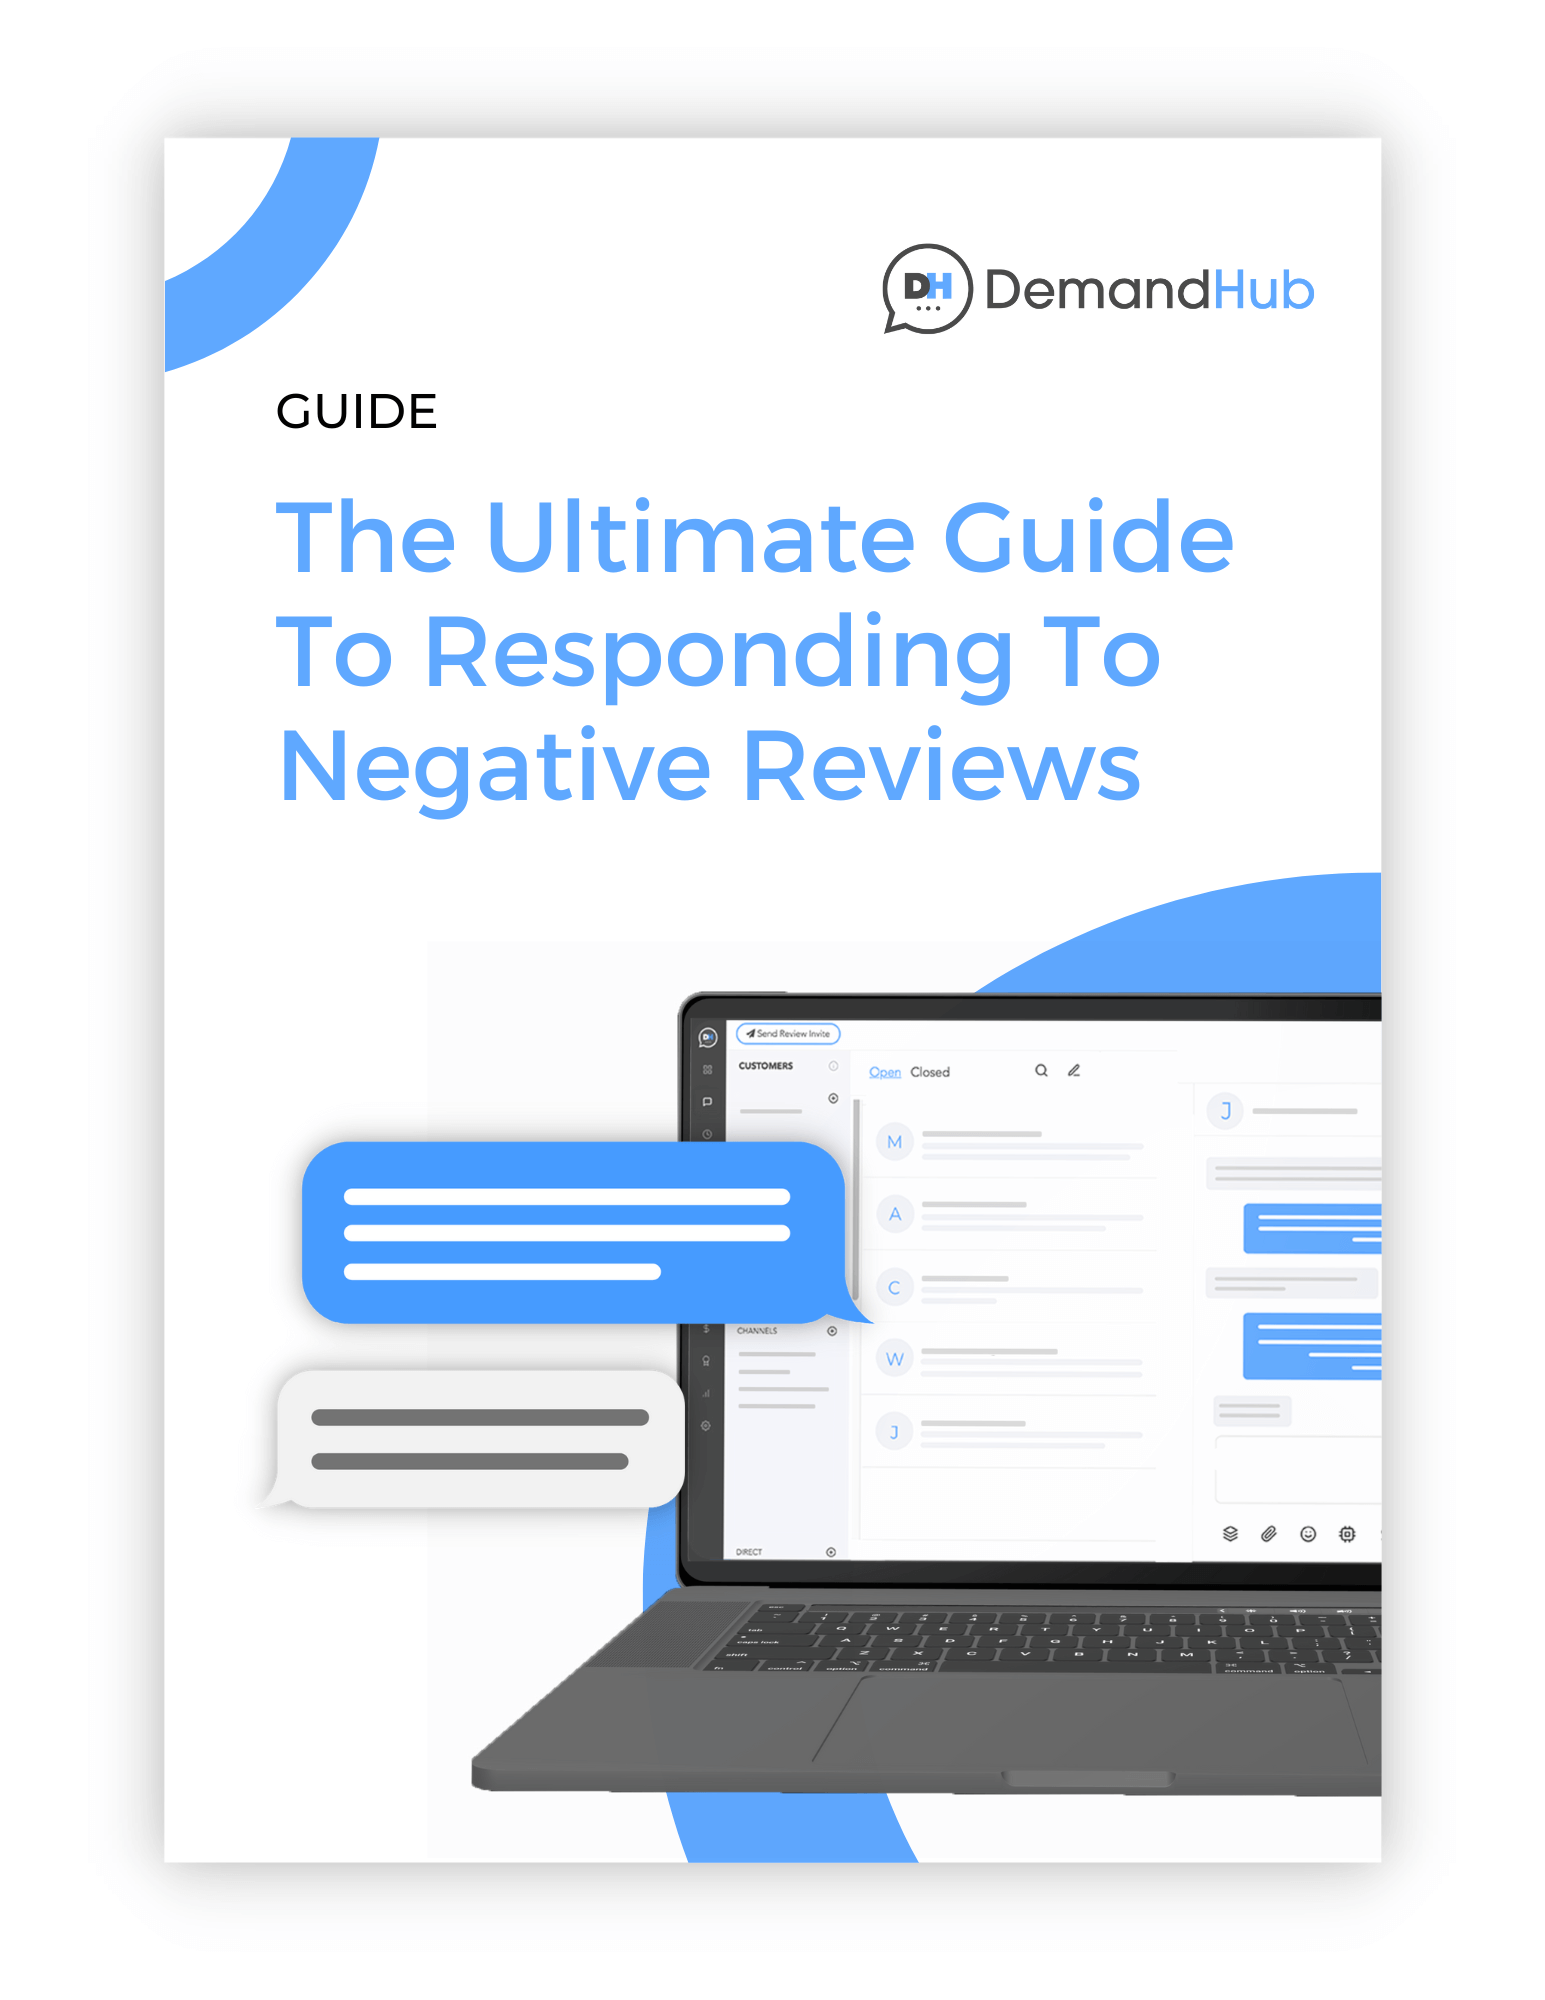 The Ultimate Guide to Responding to Negative Online Customer Reviews